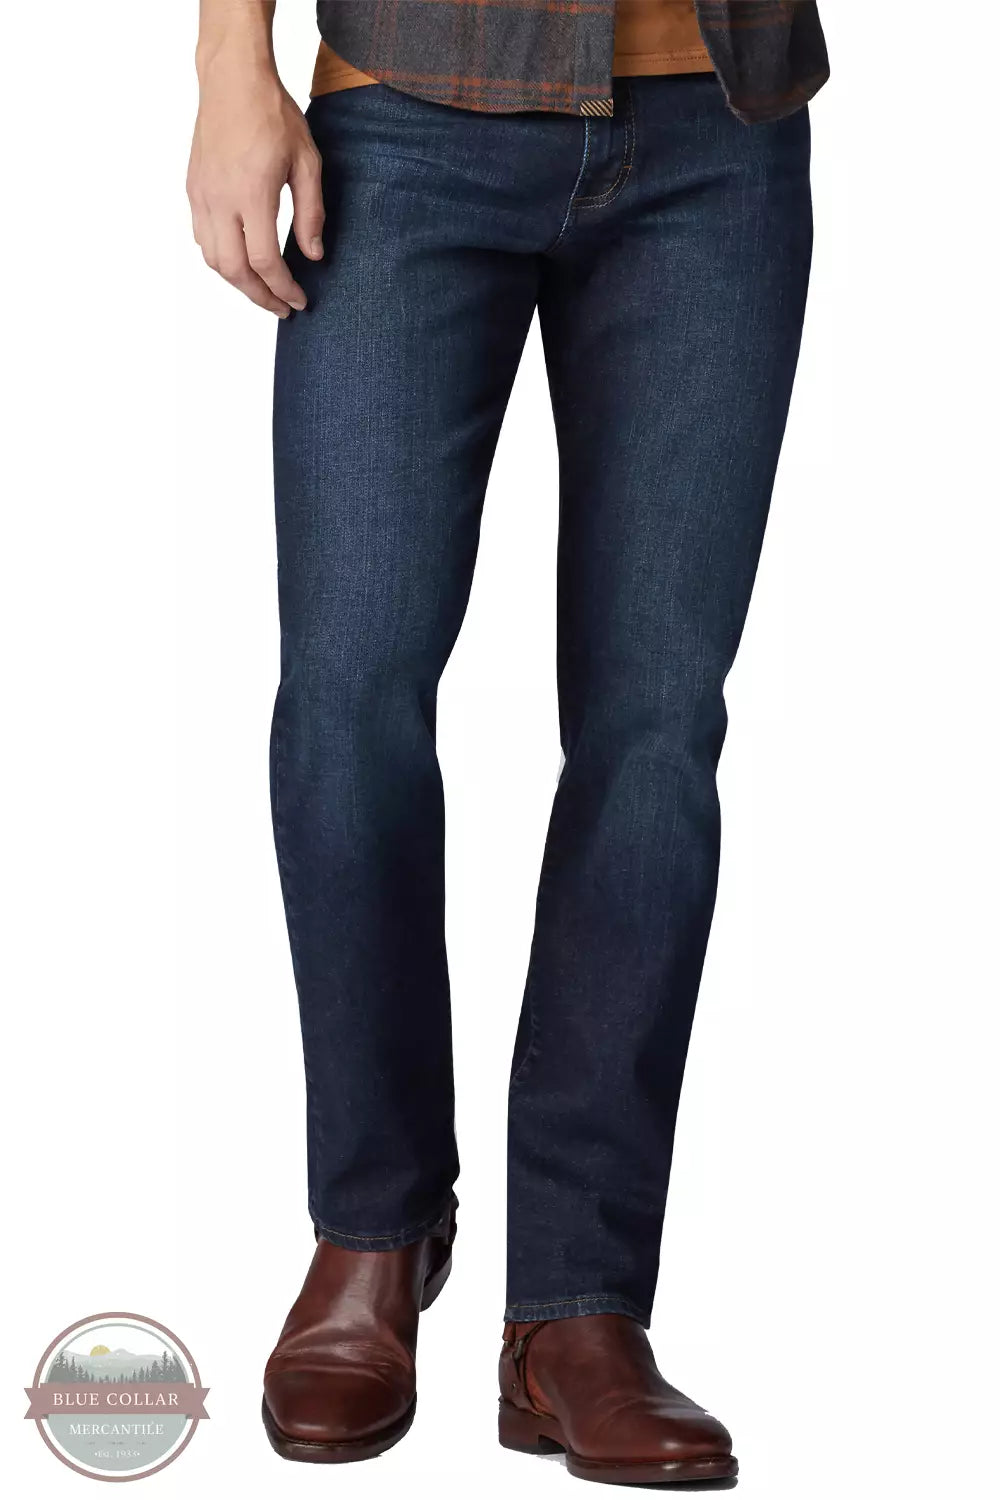 Lee 2105051 Men's Extreme Motion Straight Fit Tapered Leg Jeans Front View